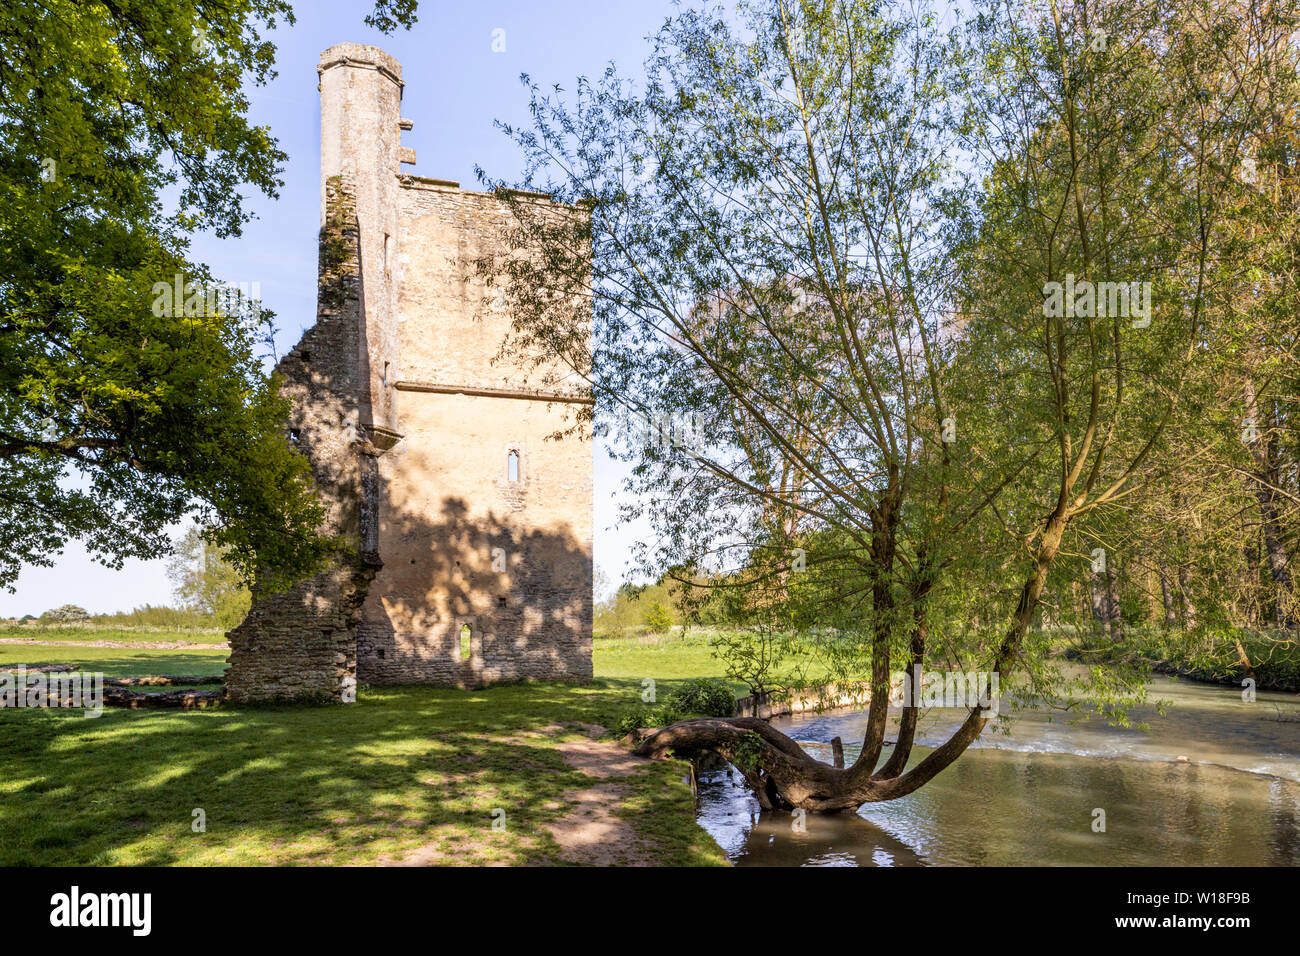 Evening light on the ruins of Minster Lovell Hall, a 15th century manor house on the banks of the River Windrush, Minster Lovell, Oxfordshire UK Stock Photo